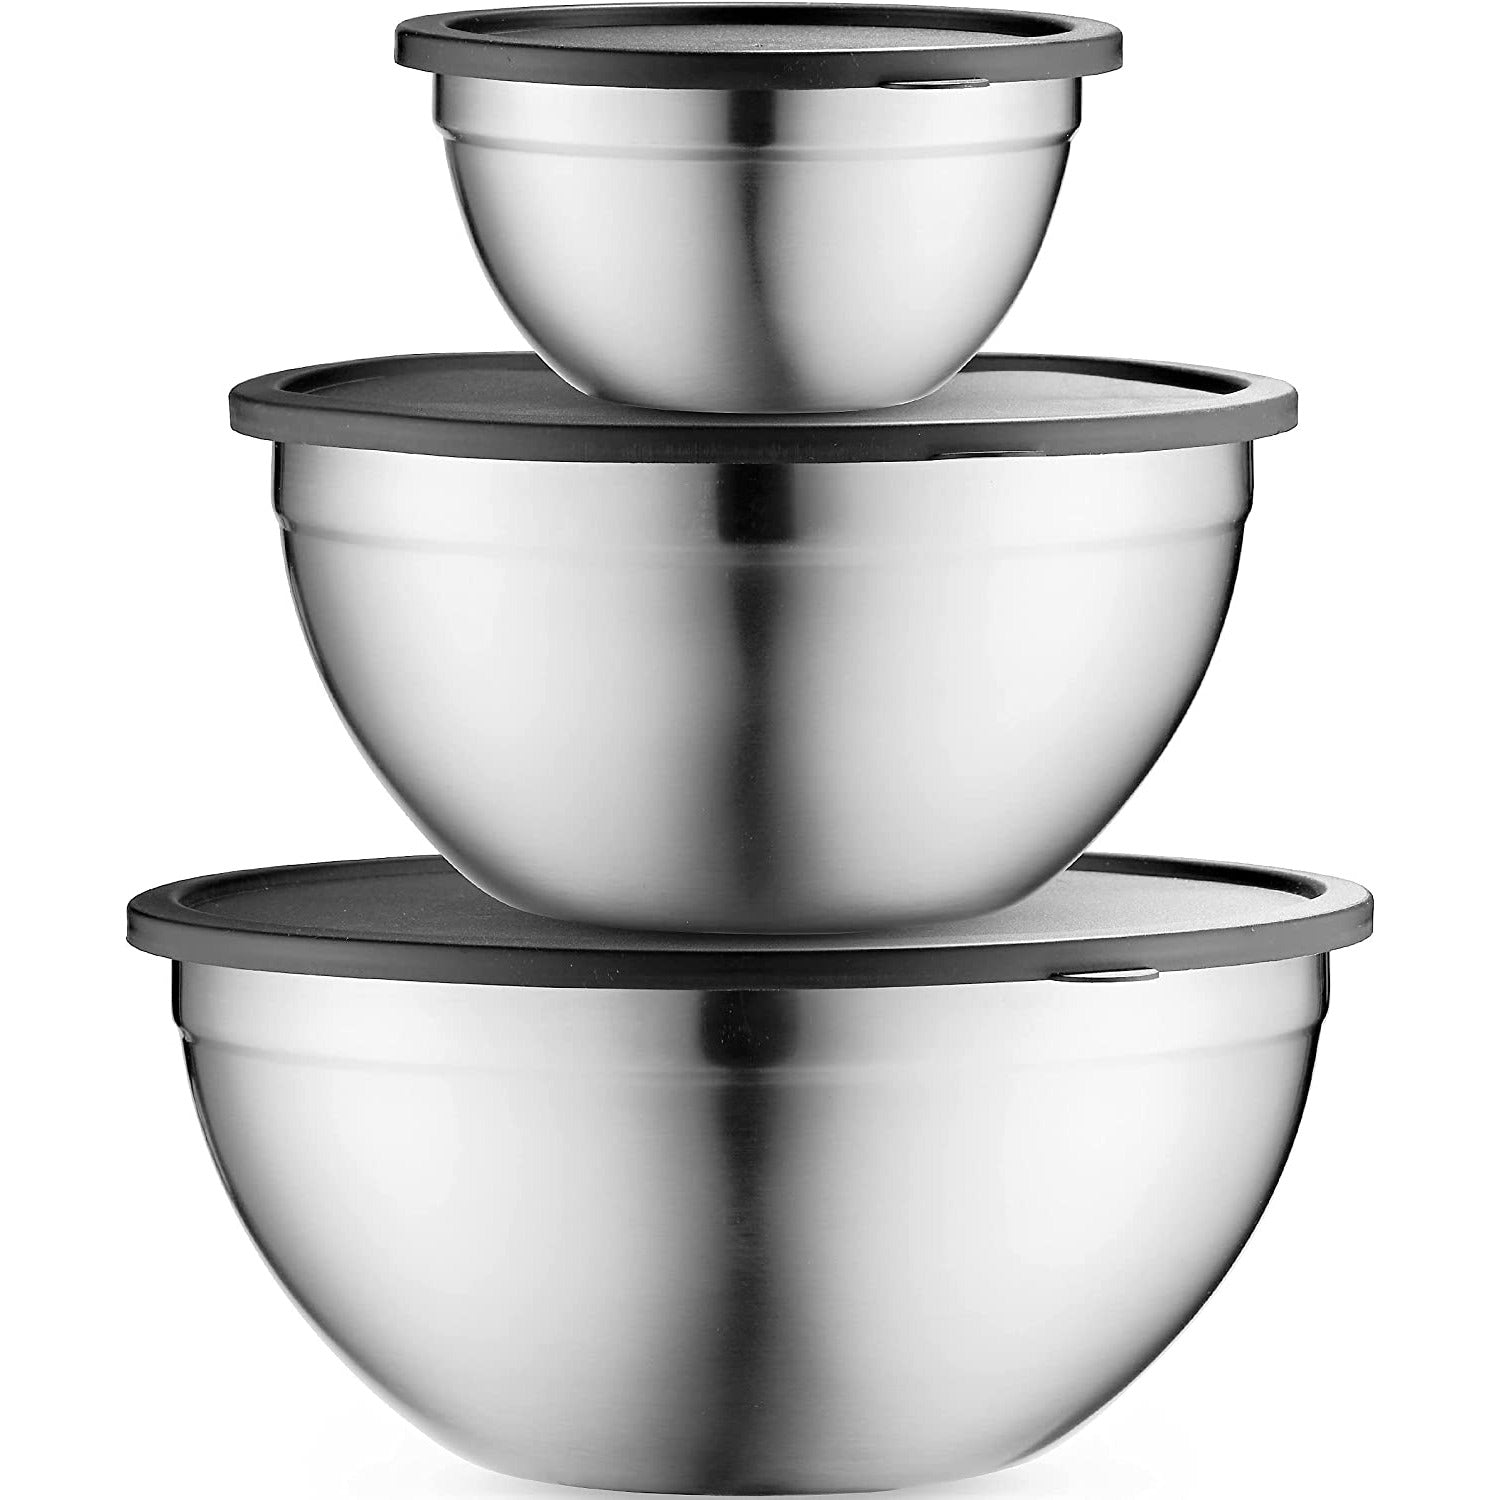 dokaworld Glass Mixing Bowls - Nesting Bowls - Space-Saving Glass Bowls  with Lids Food Storage - Set of 5 Stackable Microwave Glass Containers 